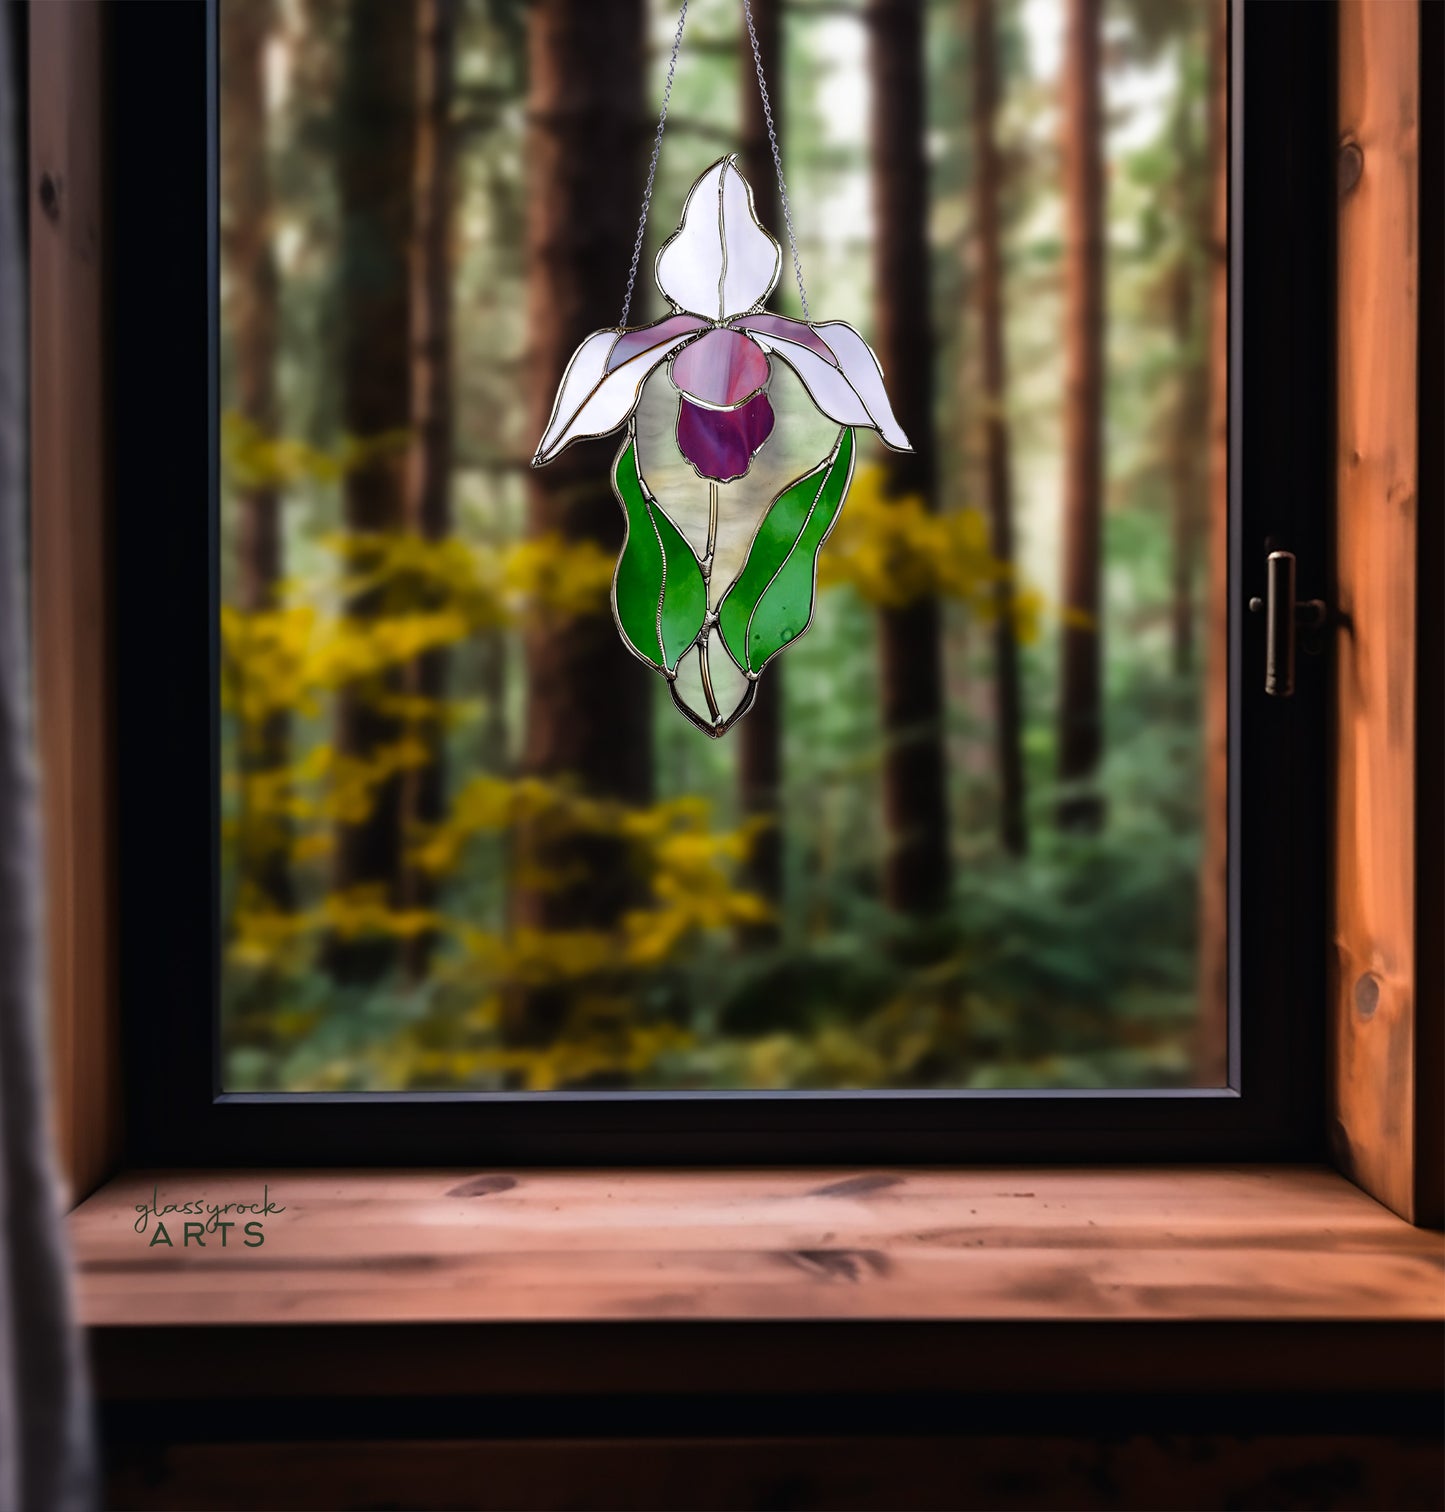 Lady Slipper Orchid Stained Glass Pattern